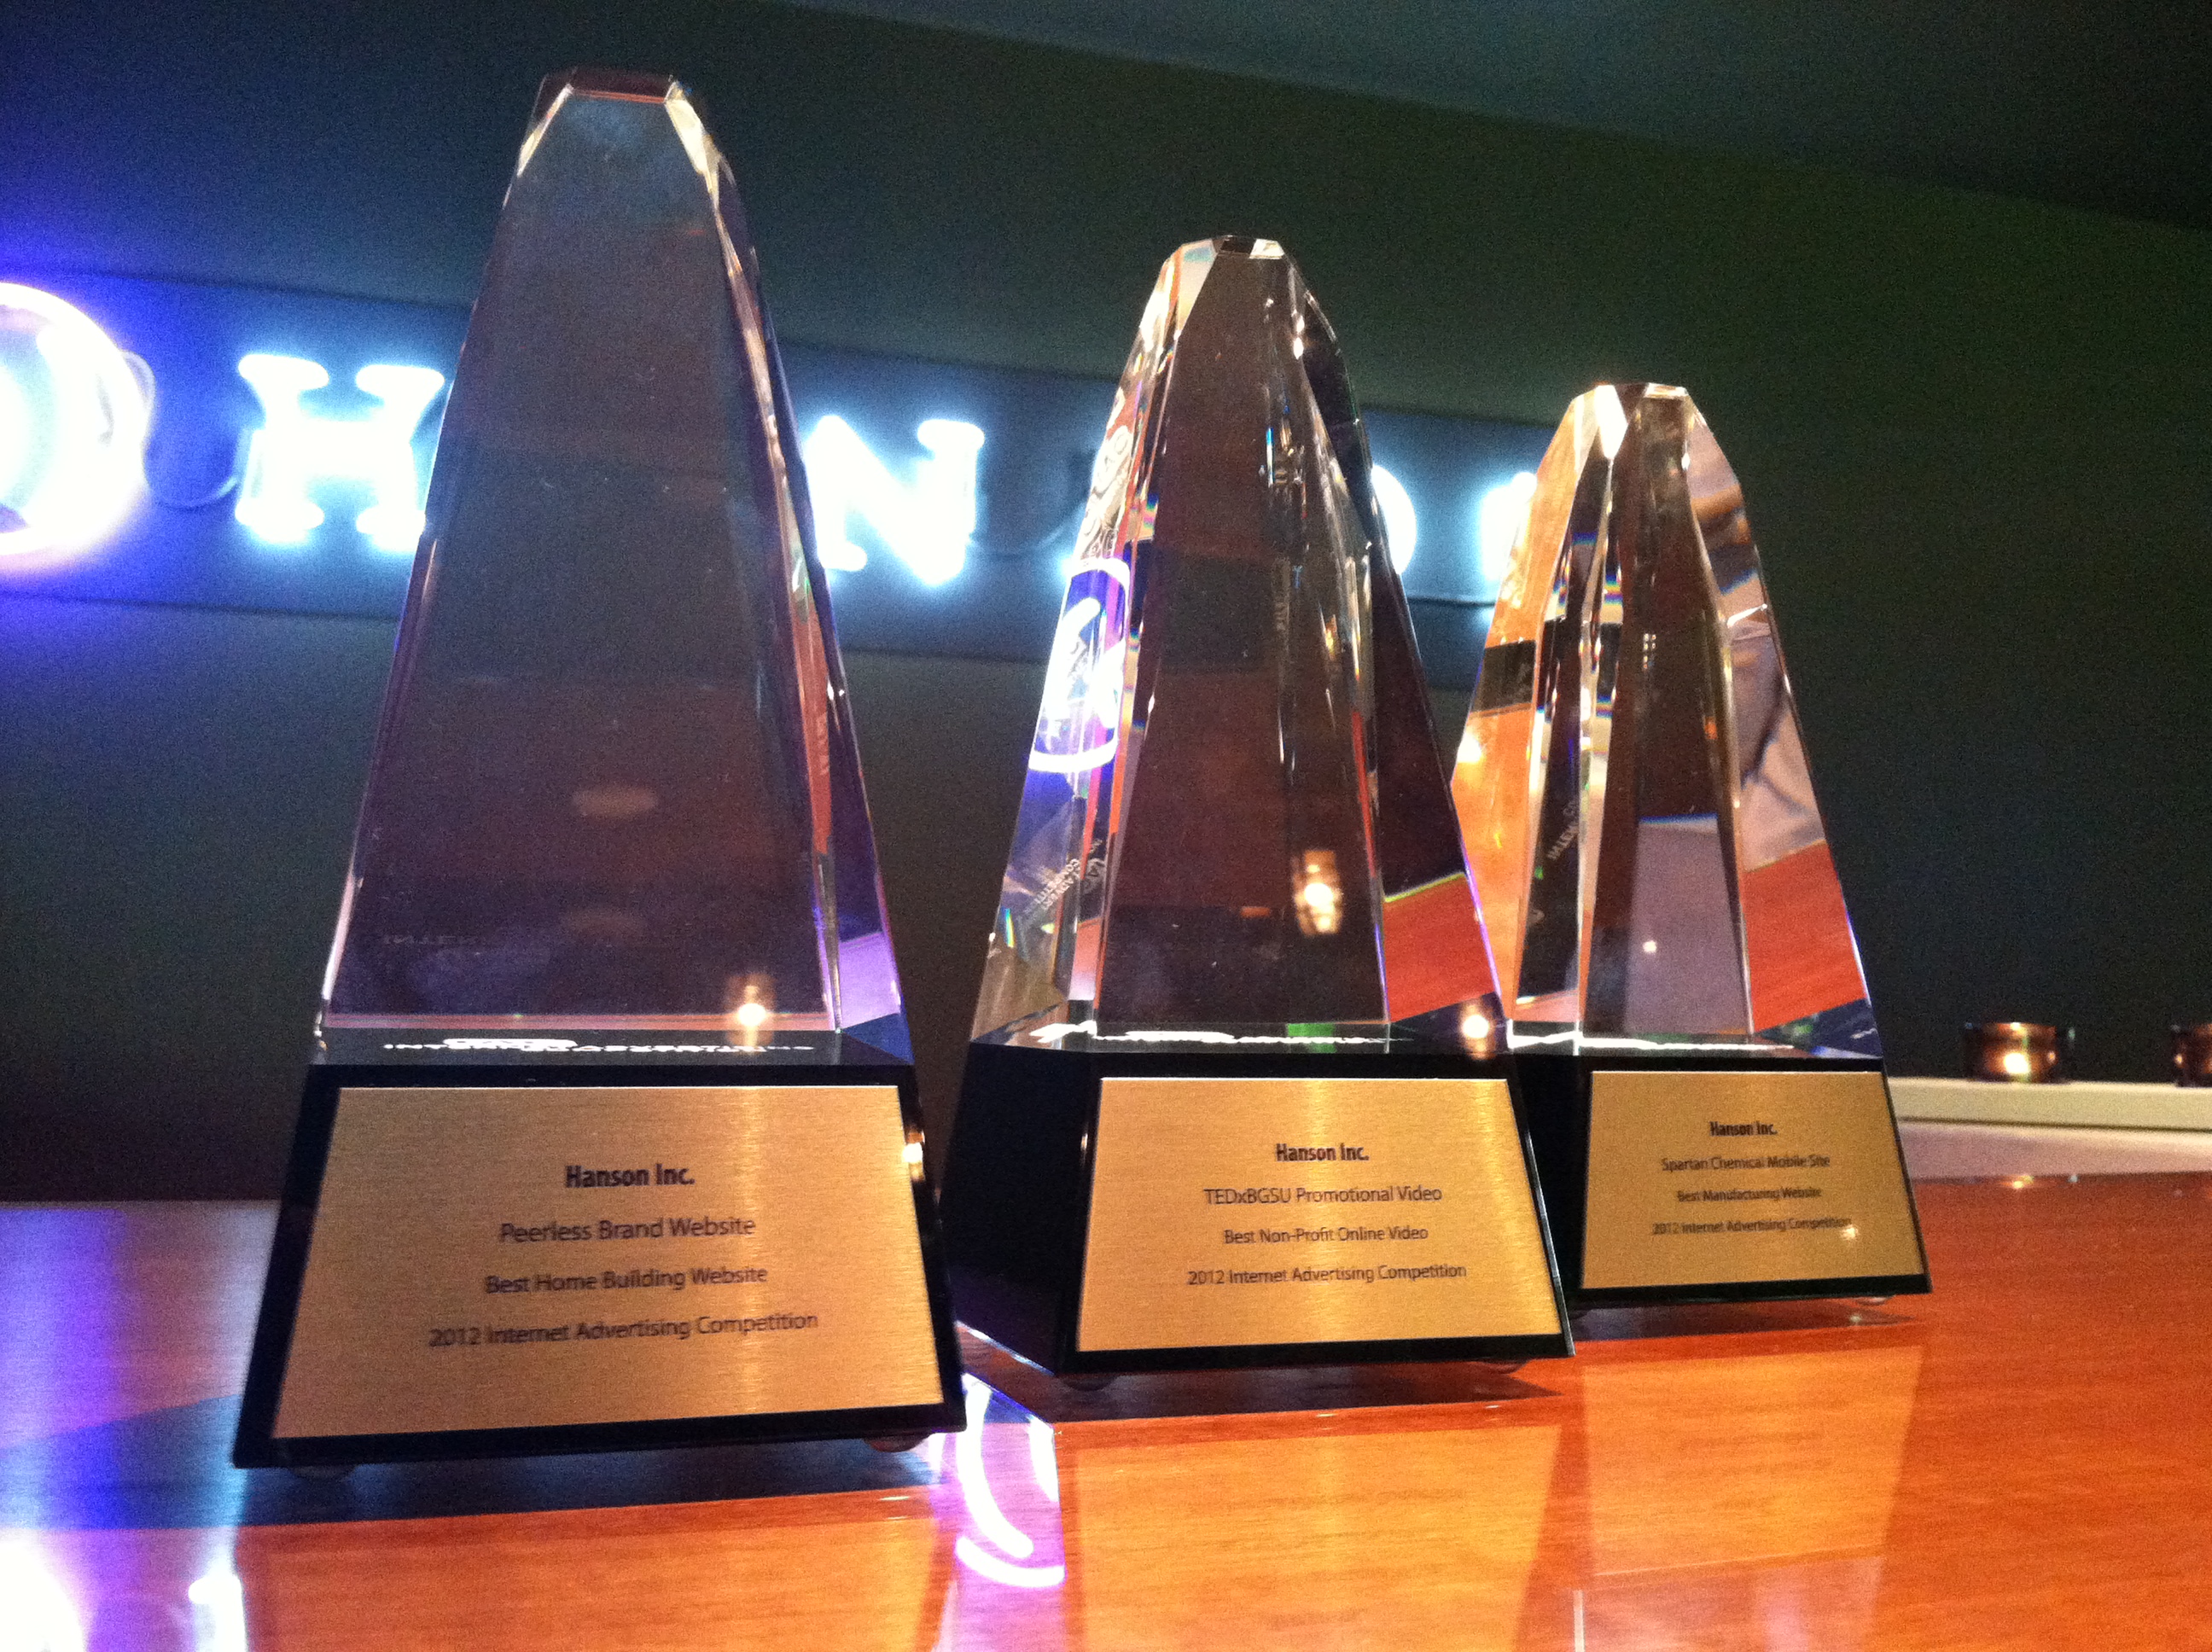 Hanson wins 3 Internet Advertising Competition Awards for 2012